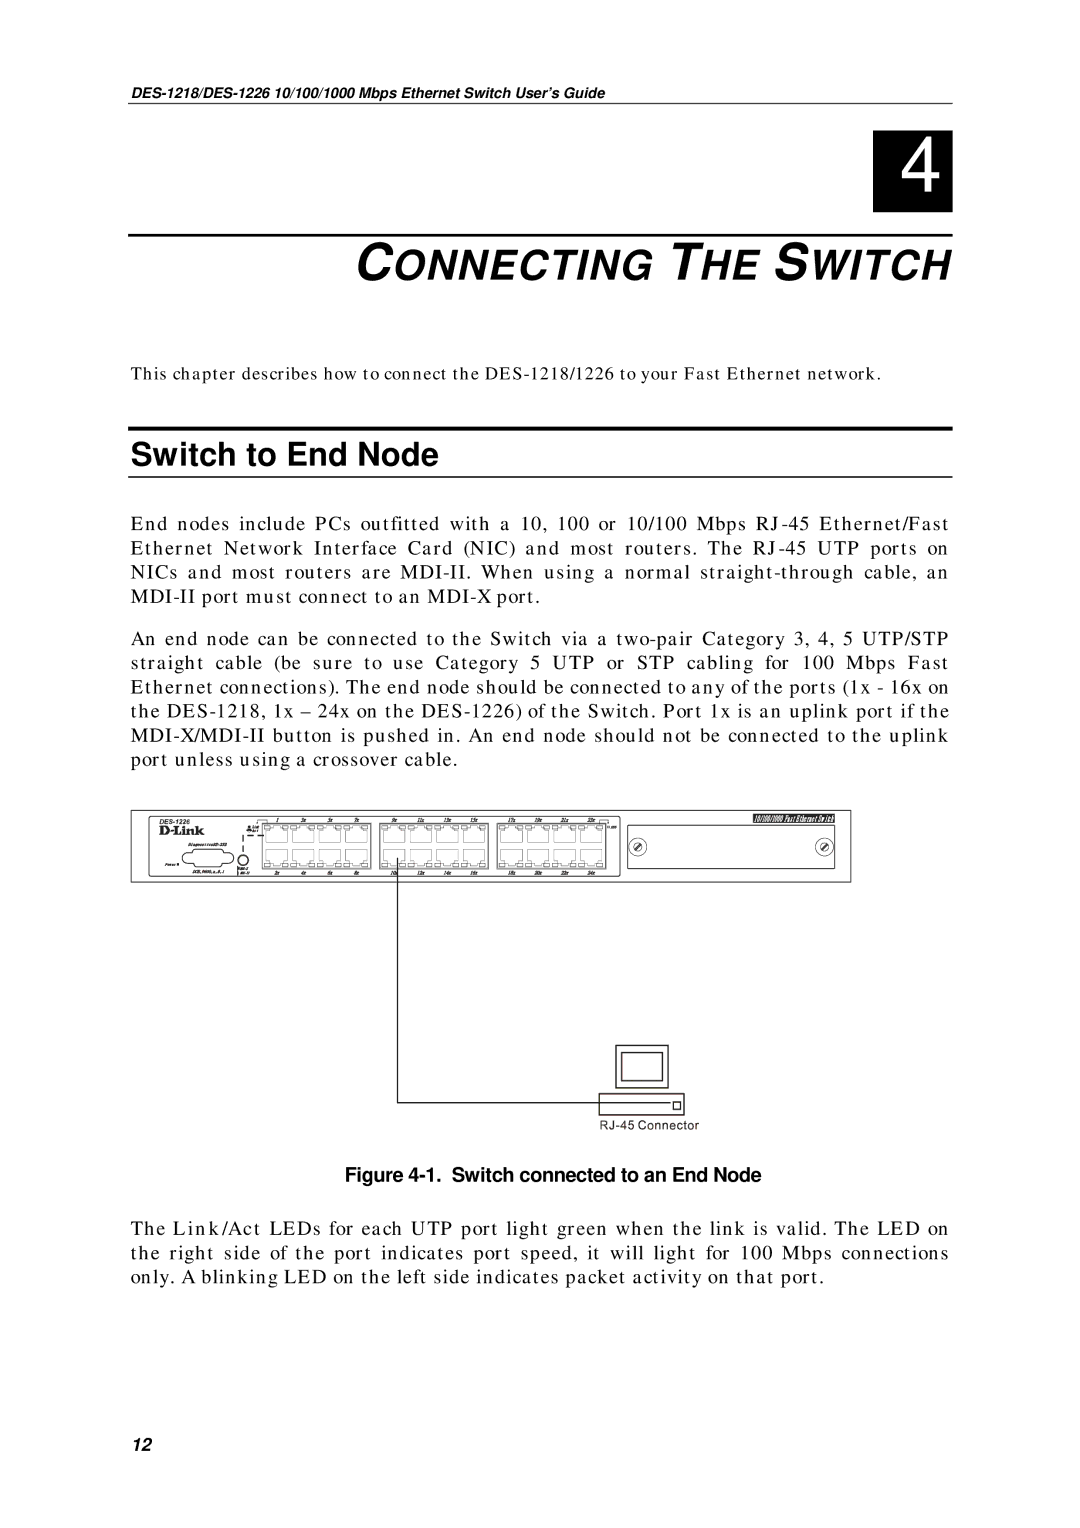 D-Link DES-1218, DES1226 manual Connecting the Switch, Switch to End Node 